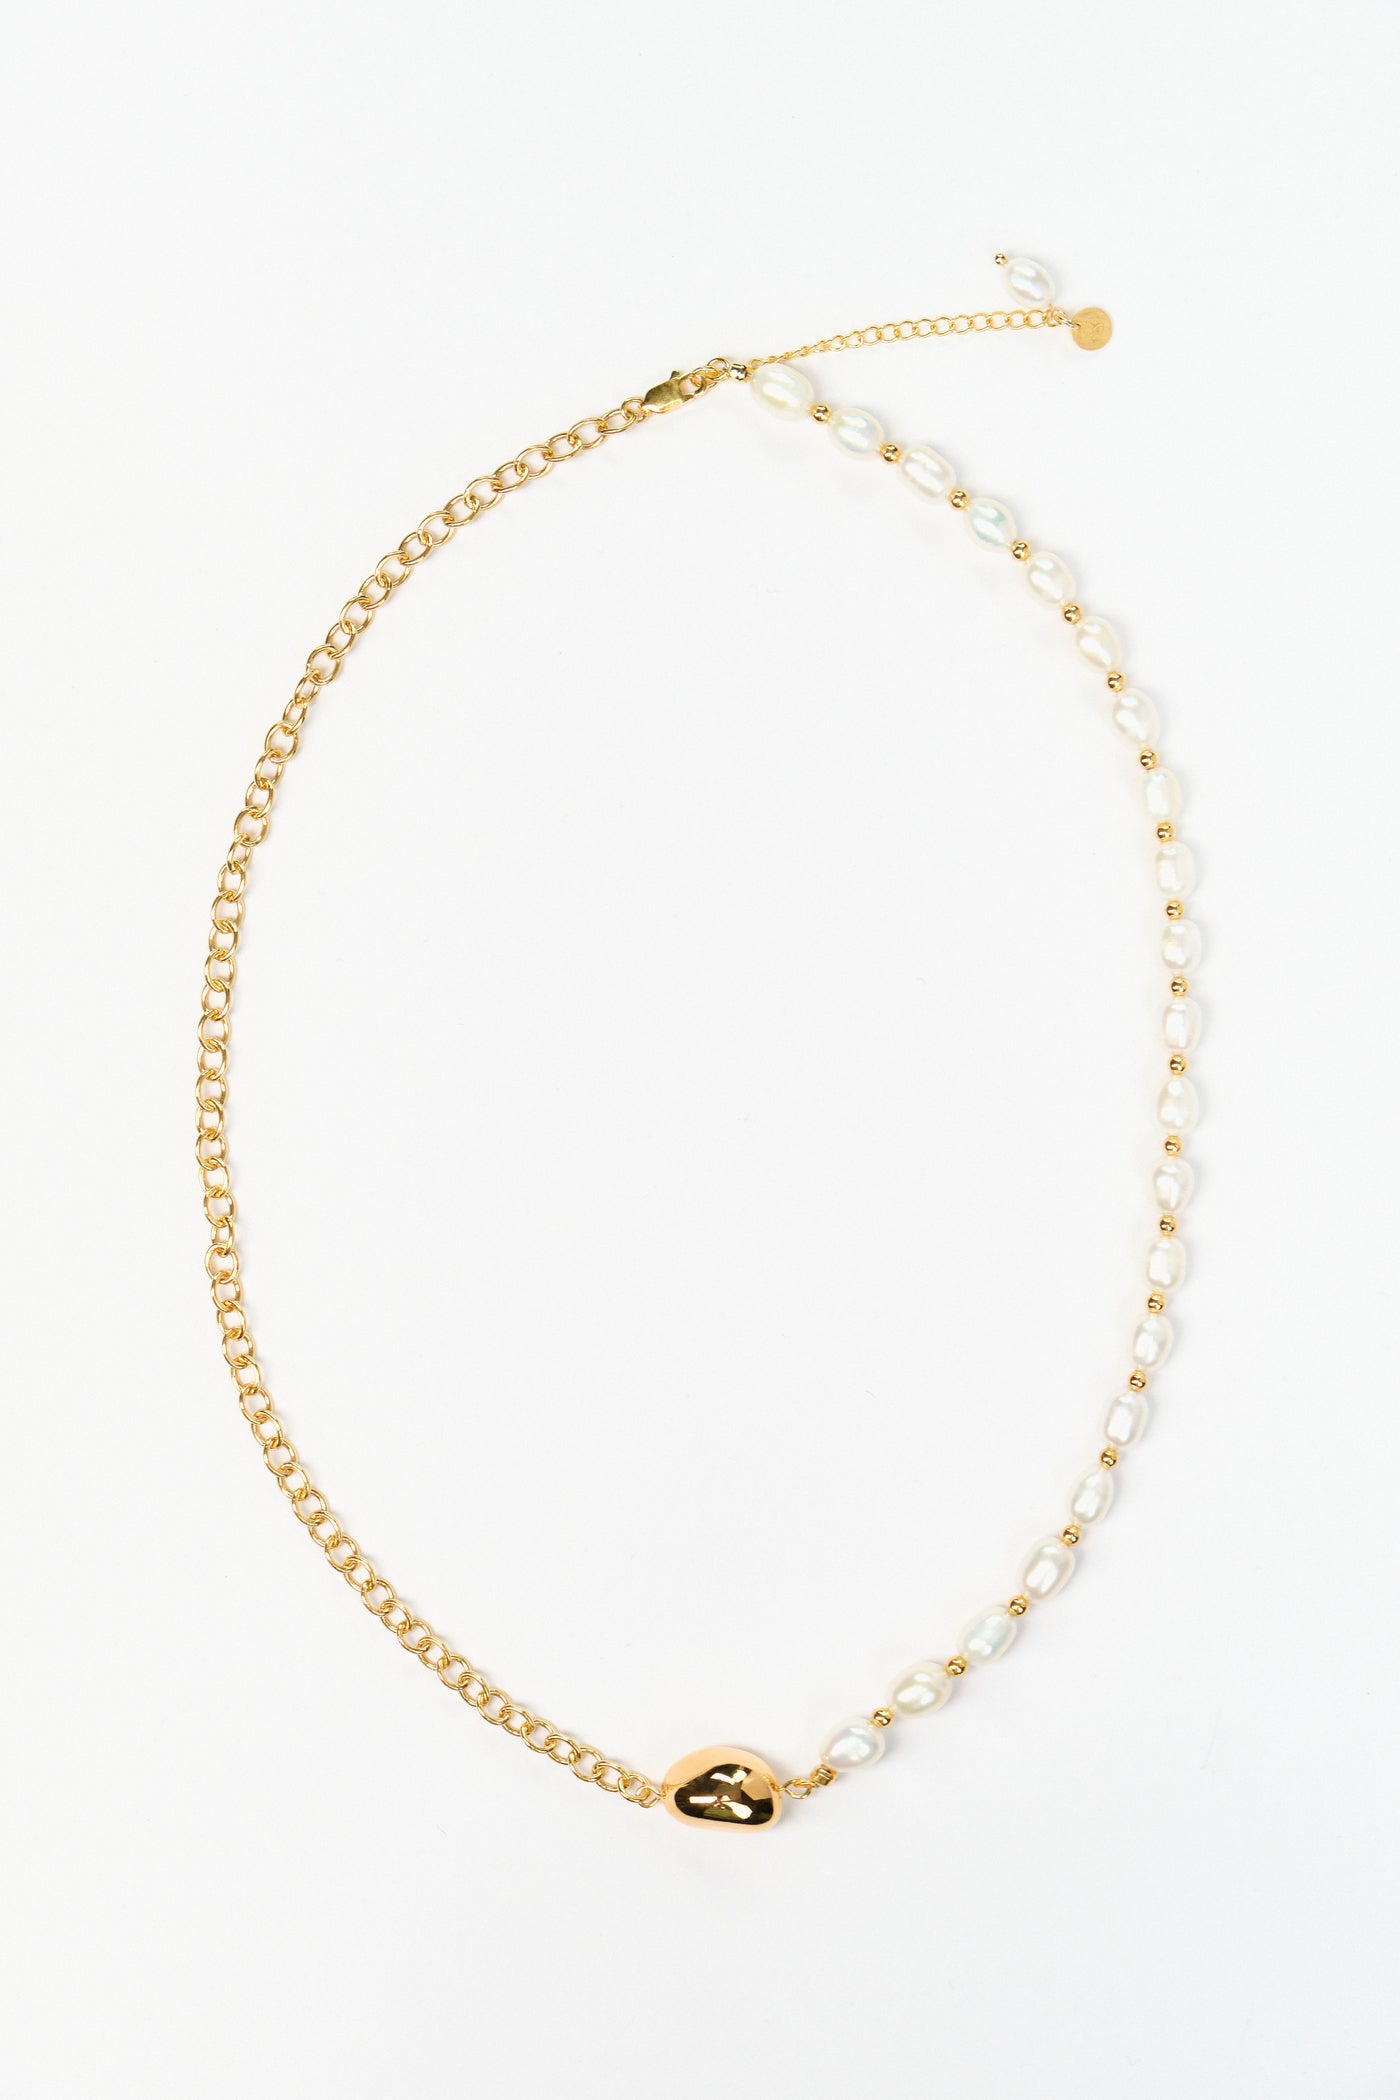 Freshwater Pearls with Link Necklace (BANJJAK EXCLUSIVE)